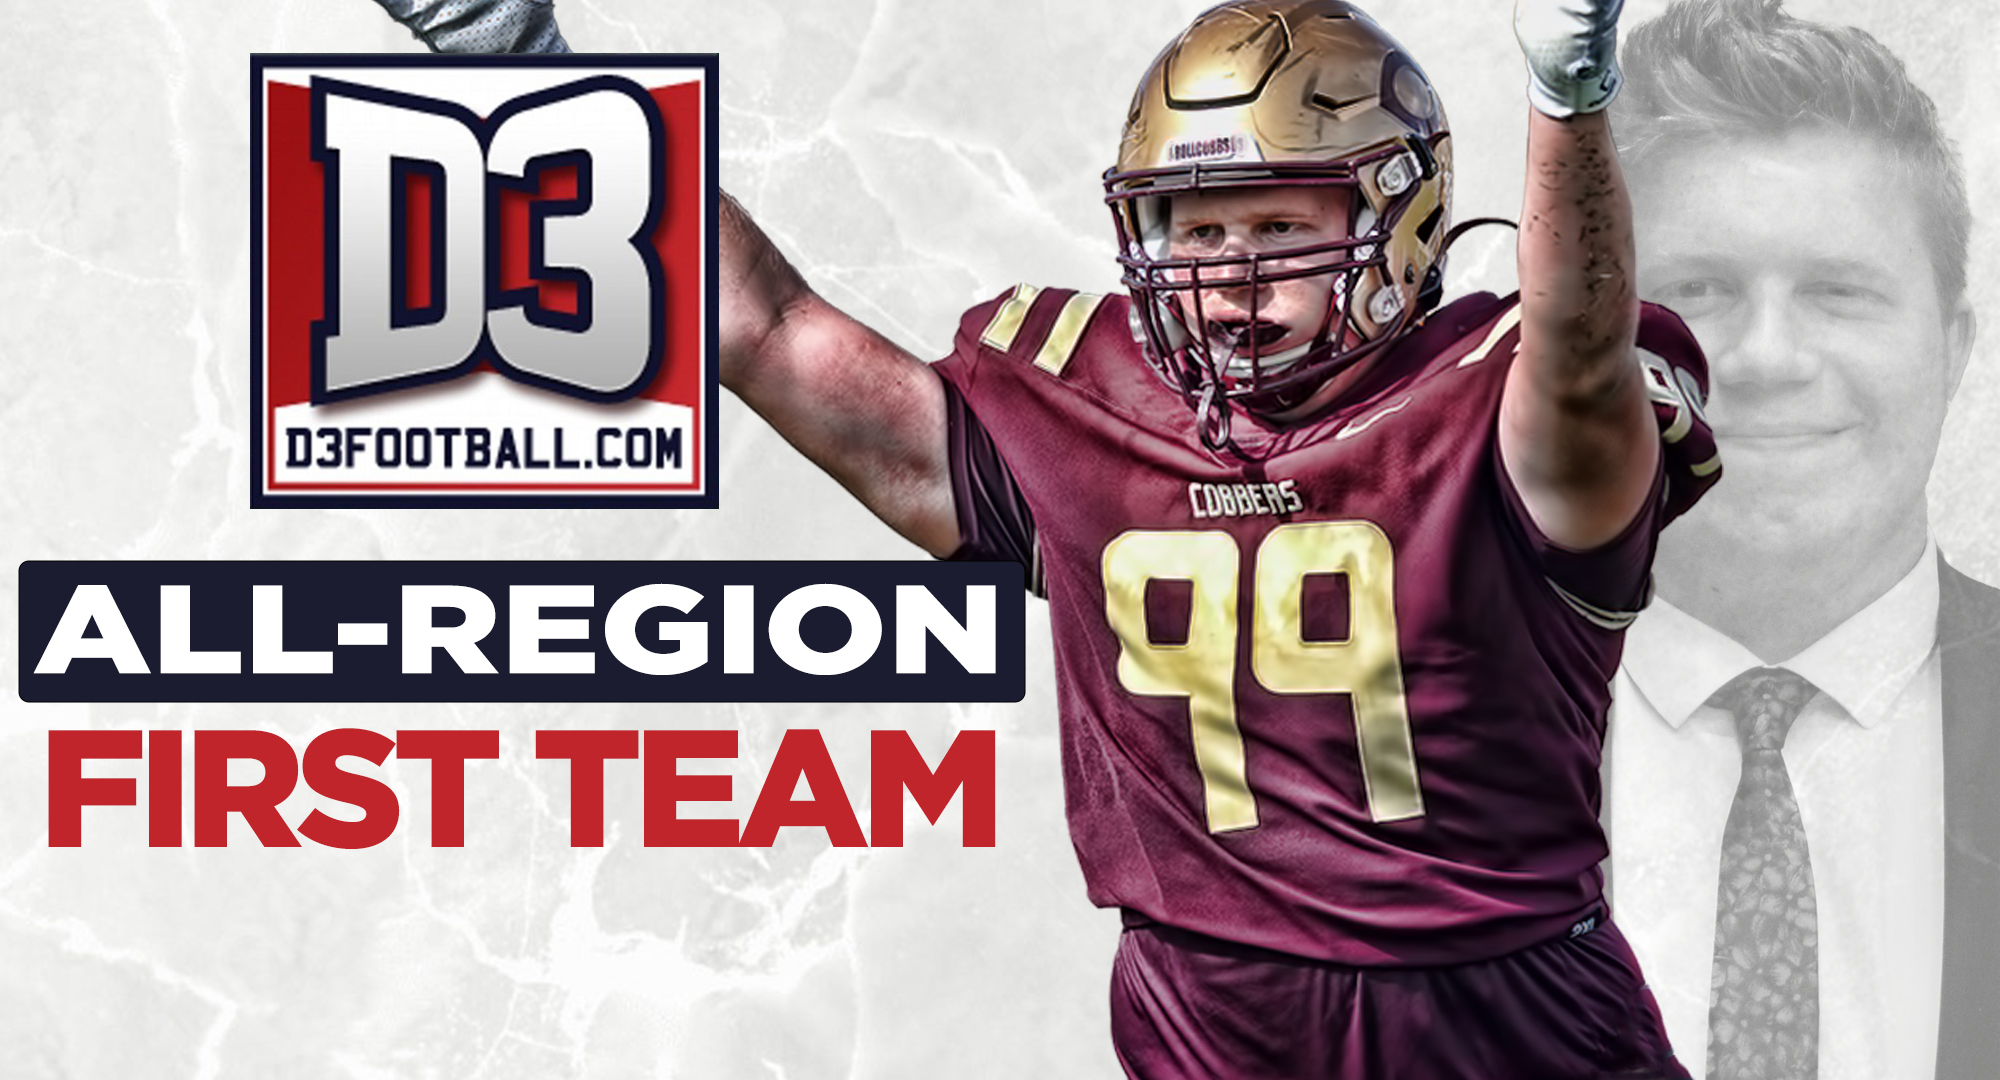 Collin Thompson became the ninth player in Cobber football history to be named to the D3football.com All-Region First Team.